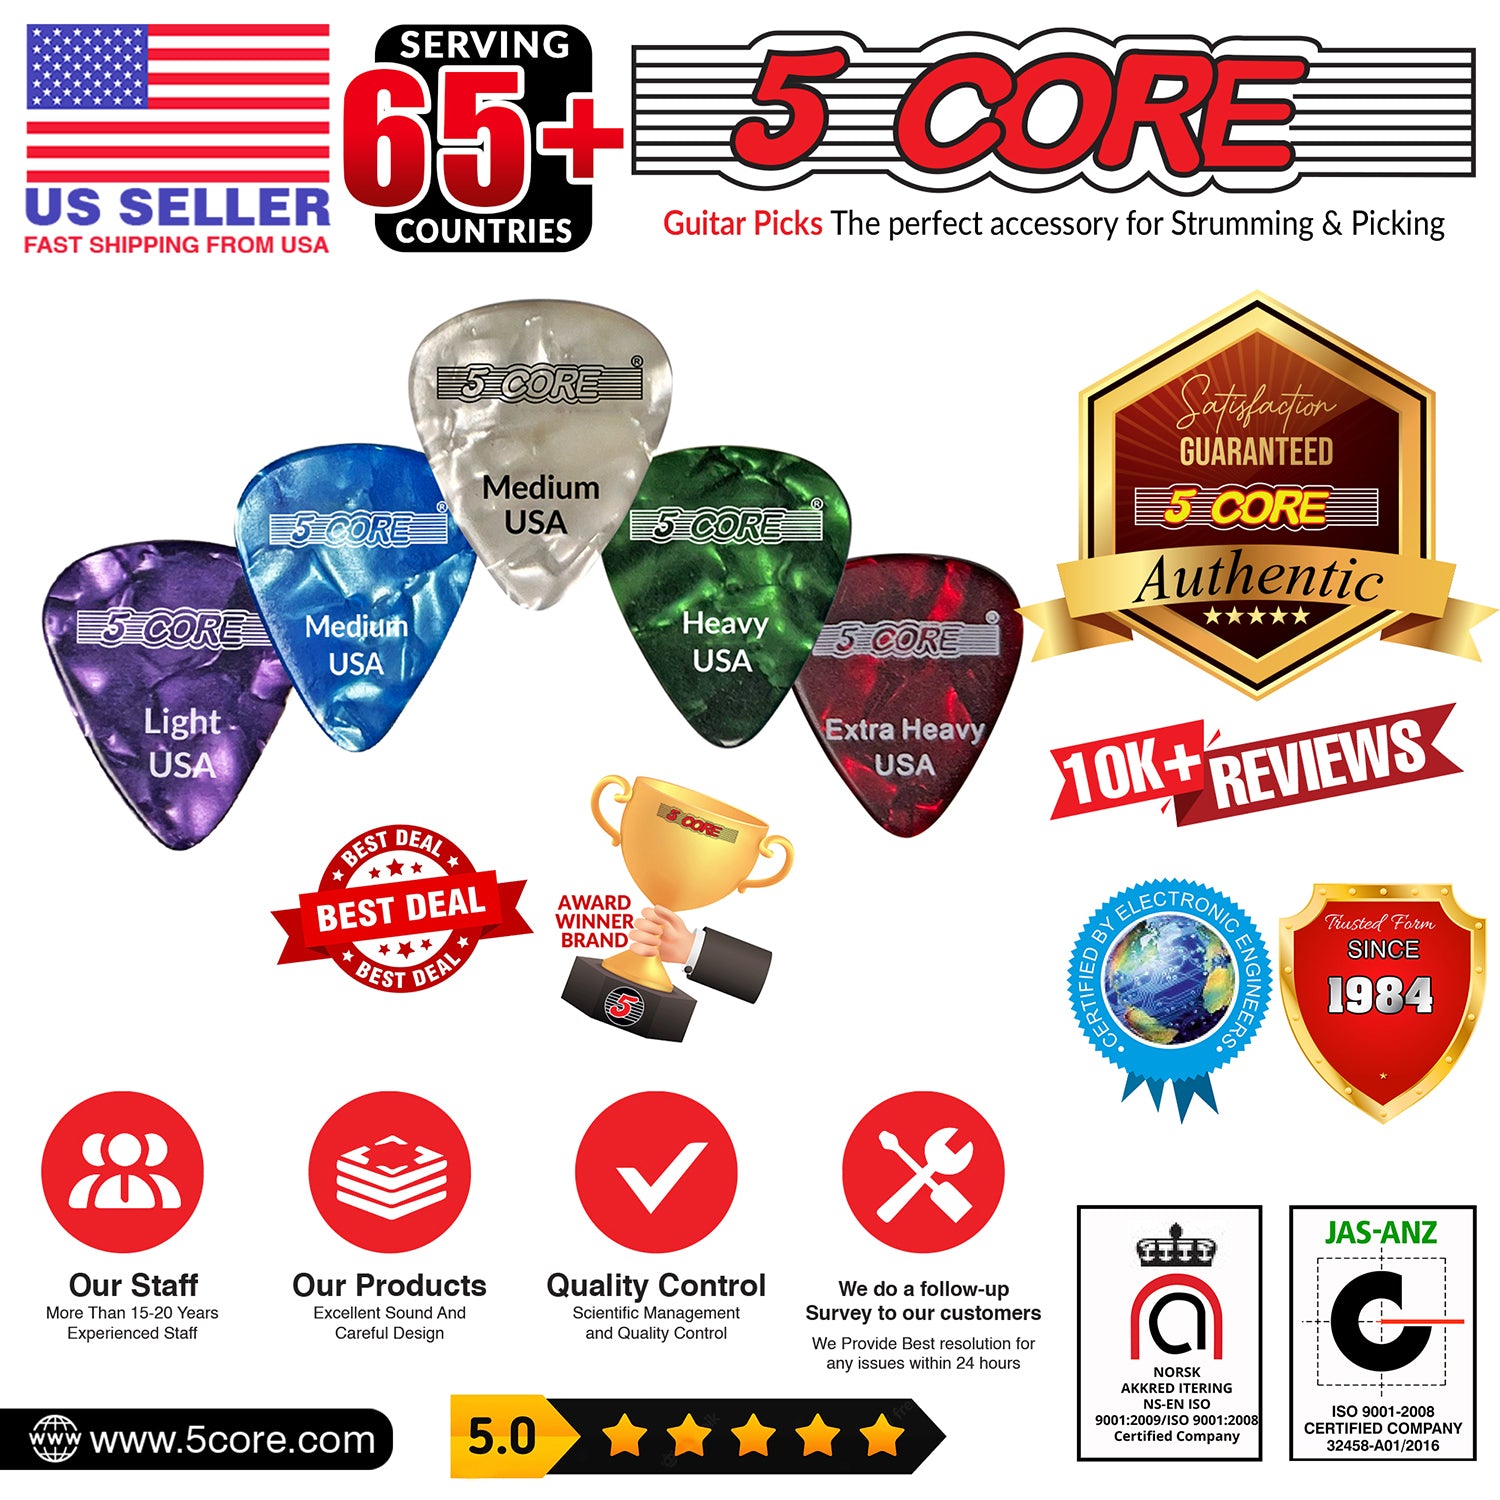 5 Core Guitar Picks 96 Pcs Light Medium Heavy and Extra Heavy Gauge Celluloid Guitar Pick for Acoustic Electric Bass Guitar